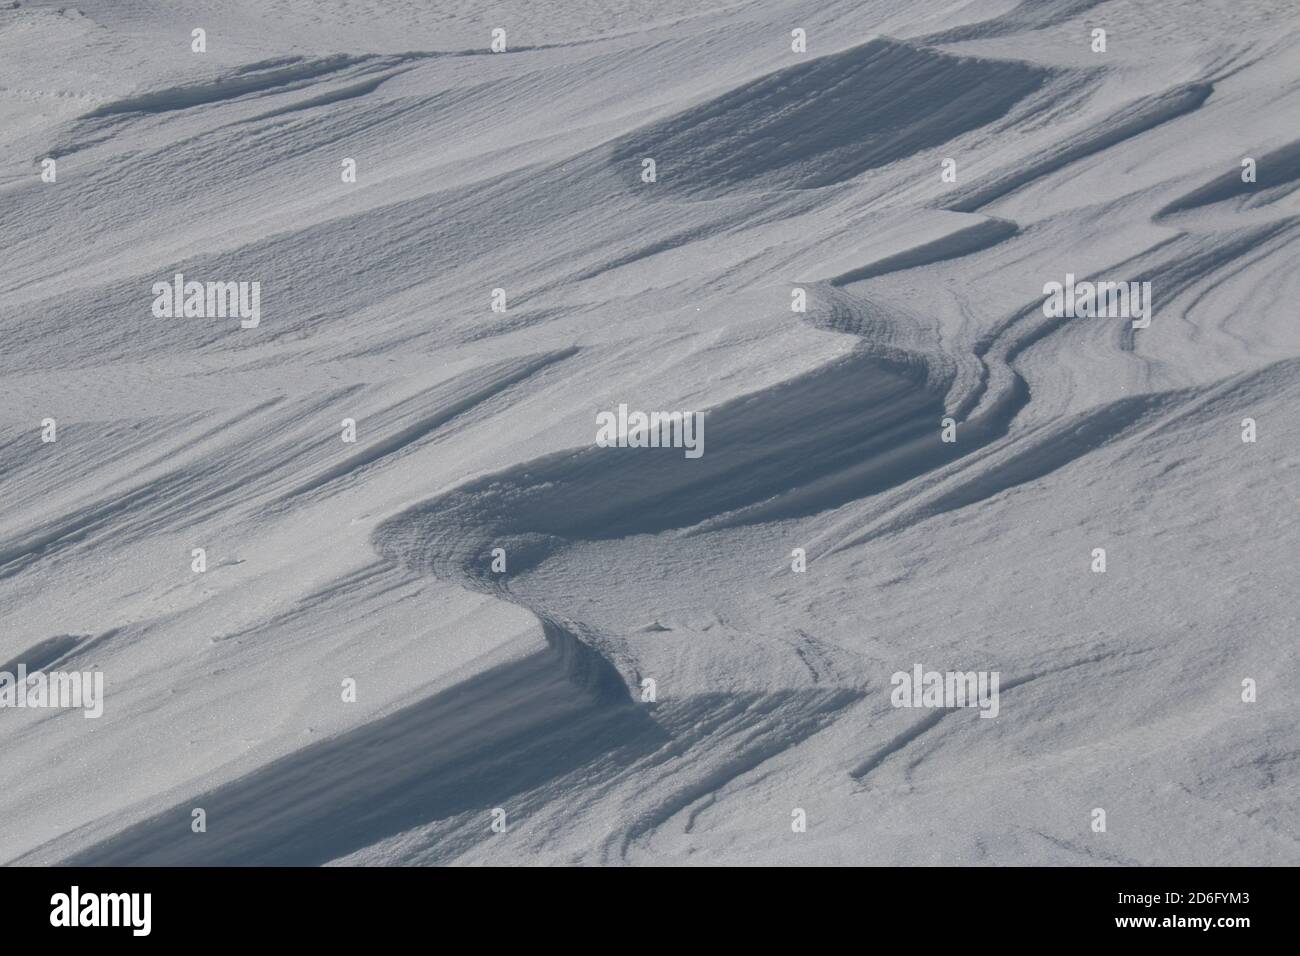 Natural patterns and ridges in windswept snow Stock Photo